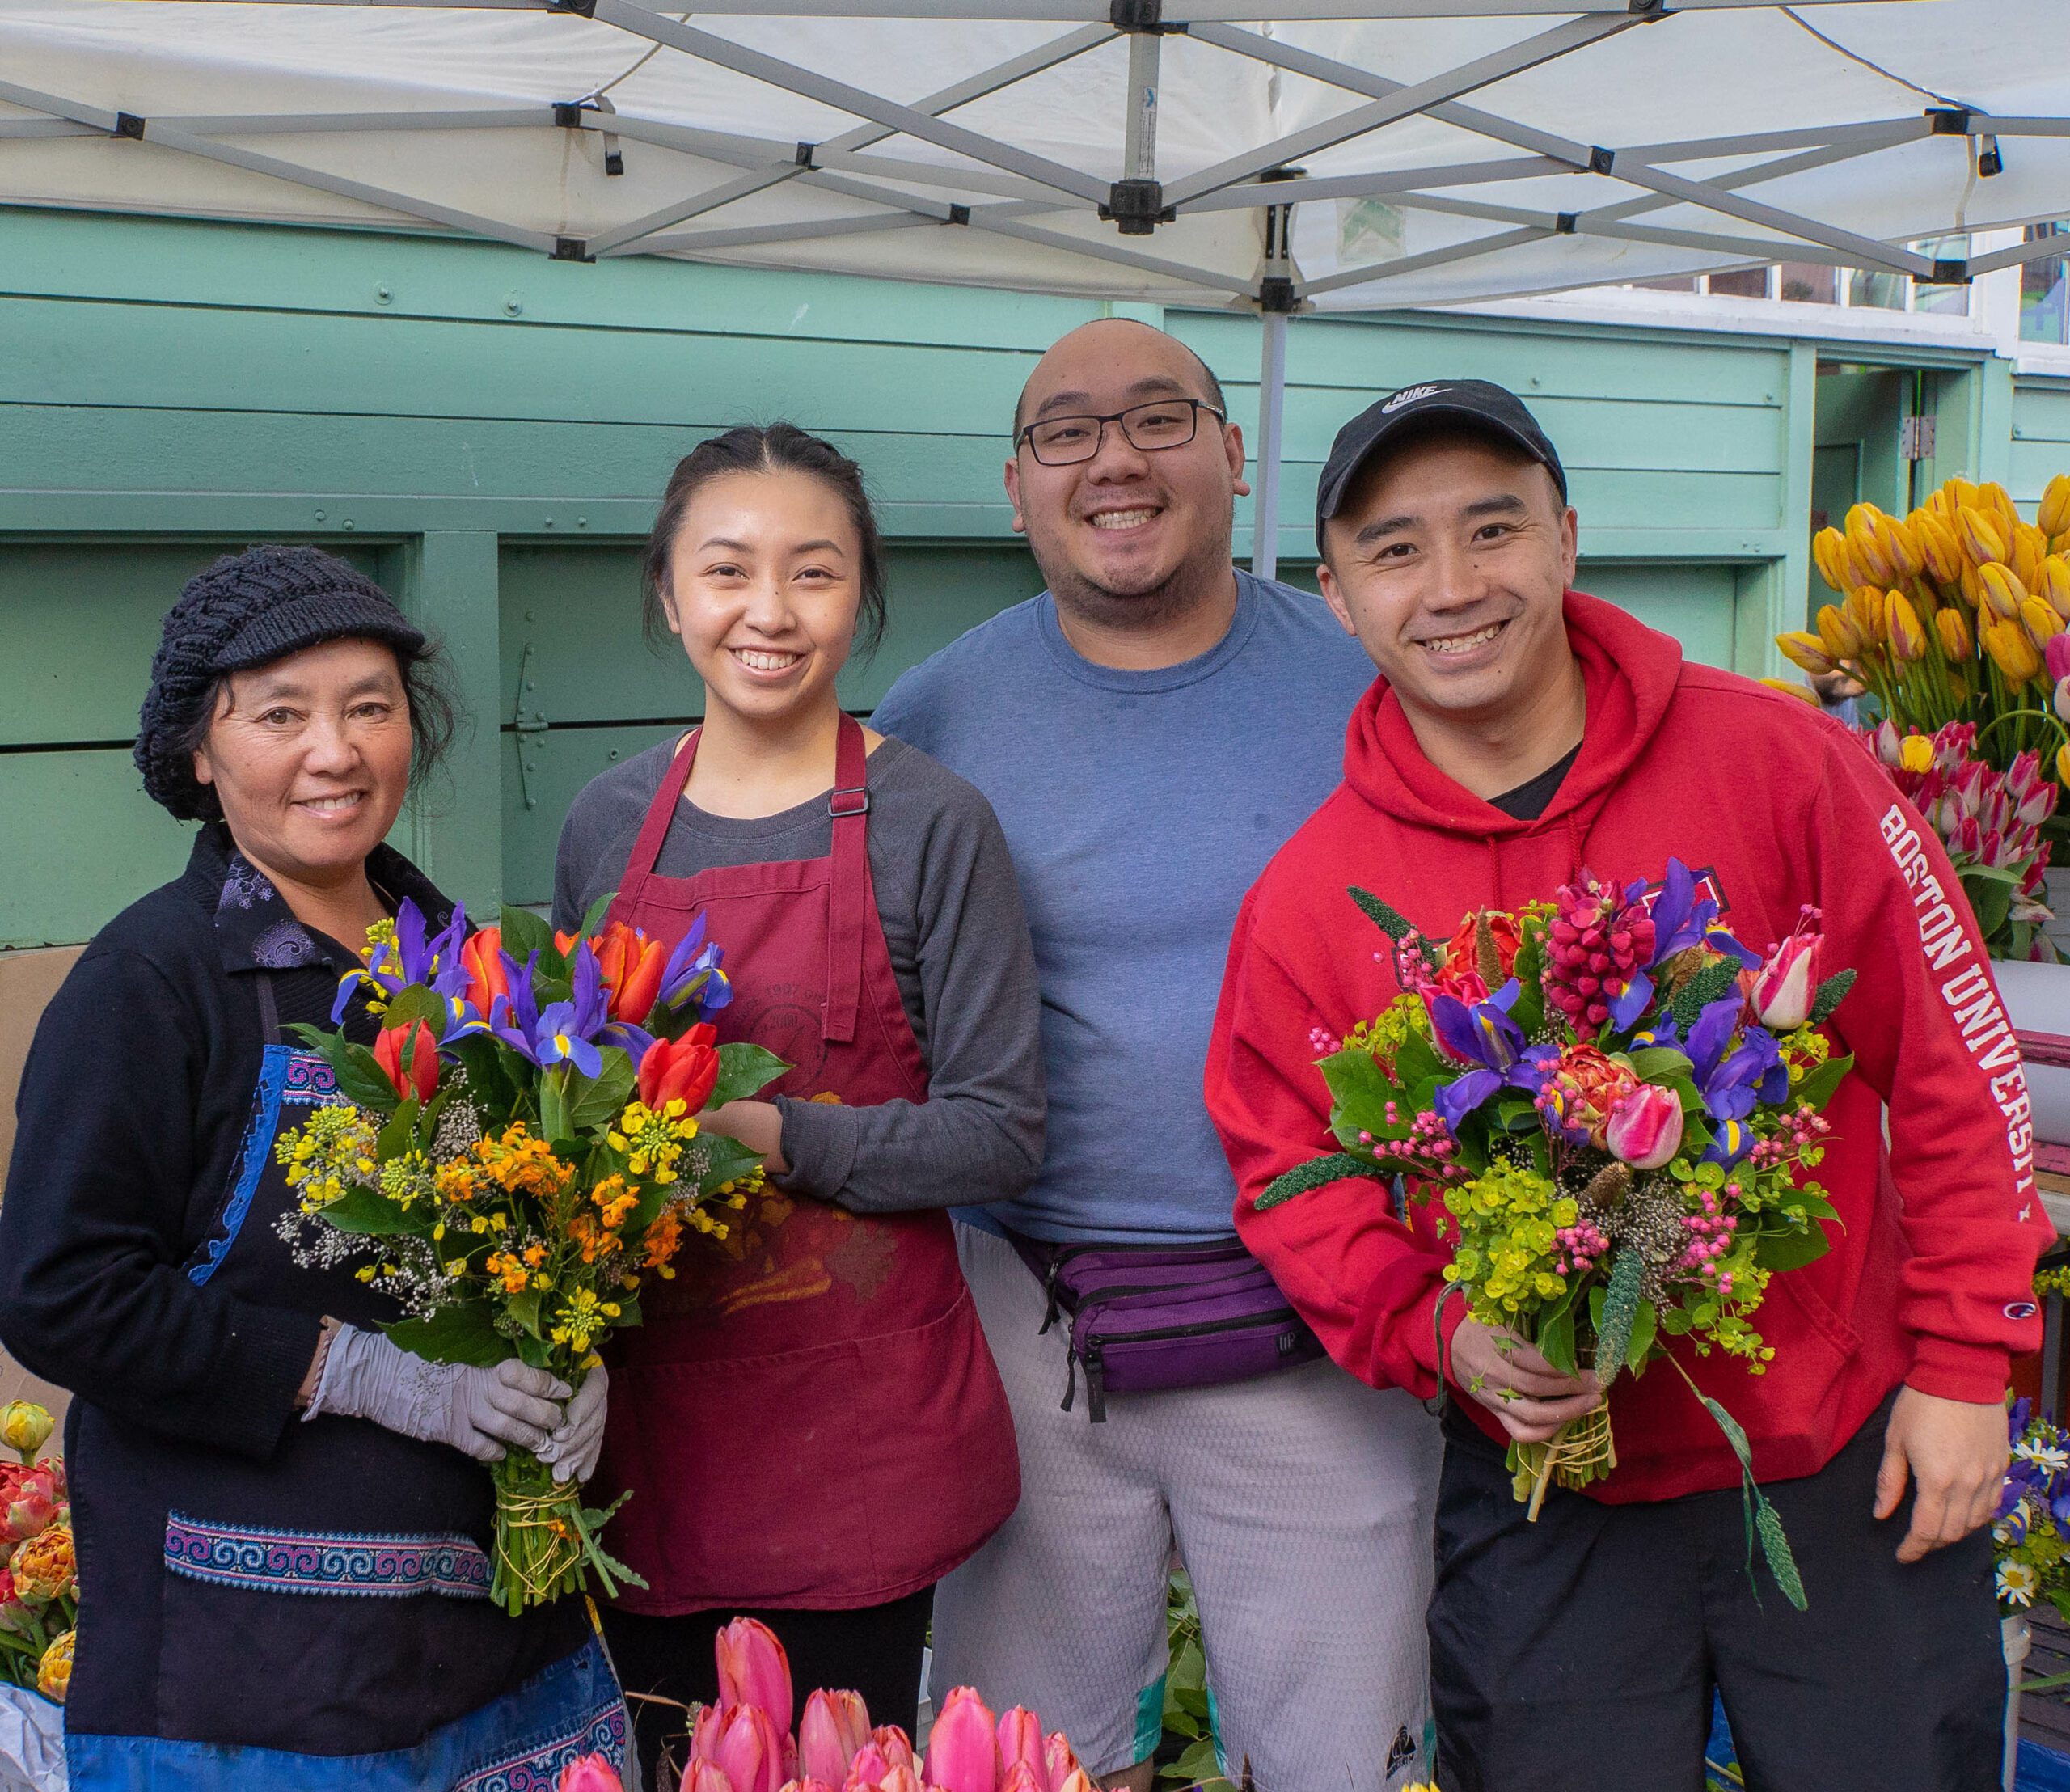 Flower farmers at Pike Place Market